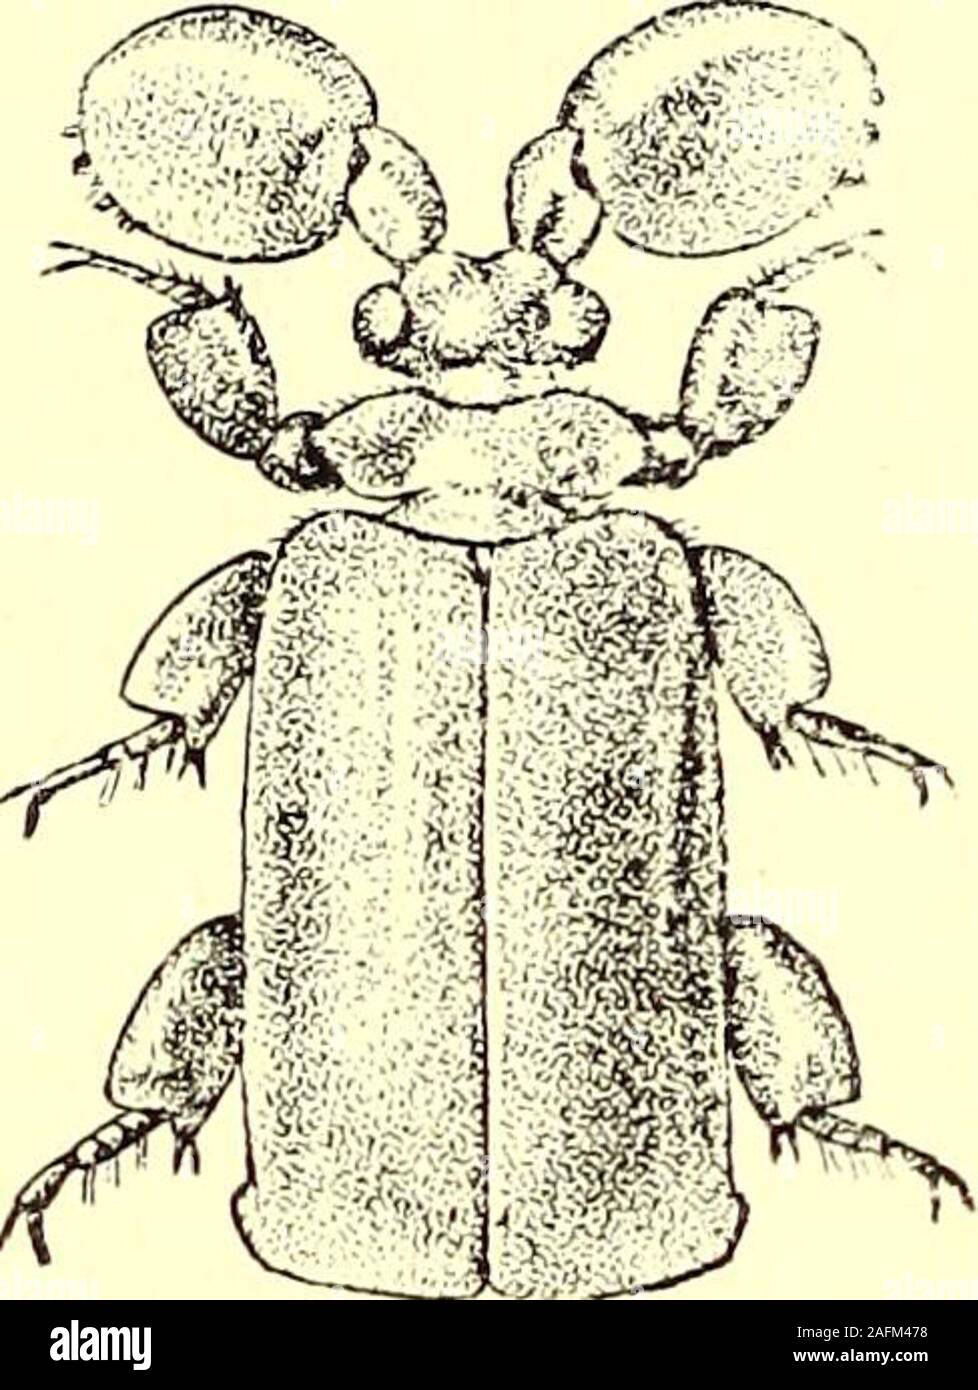 . Coleoptera : general introduction and Cicindelidae and Paussidae. suture, behind the middle badgleyi, sp. n., p. 469. 235. Platyrhopalopsis mellyi, Westw. Platyrhopalus mellyi, Westwood. Trans. Ent. Soc. ii, p. 84, pi. 10,. fig. -5 ; id., Thes. Ent. Oxon. 1874, pi. 18, fig. 2; Wasmann, Notes Leyden Mus. xxv, 1904, p. 18.Platyrhopalopsis mellyi, Desneux, Gen. Insect., Paussidse, pi. 2,. fig. 20. Stout and robust, pitchy or pitchy-black, unicolorous, shining ;head almost smooth, with feeble traces of a central furrow on thevertex ; club of antennae almost round, withthe apical part of the exte Stock Photo